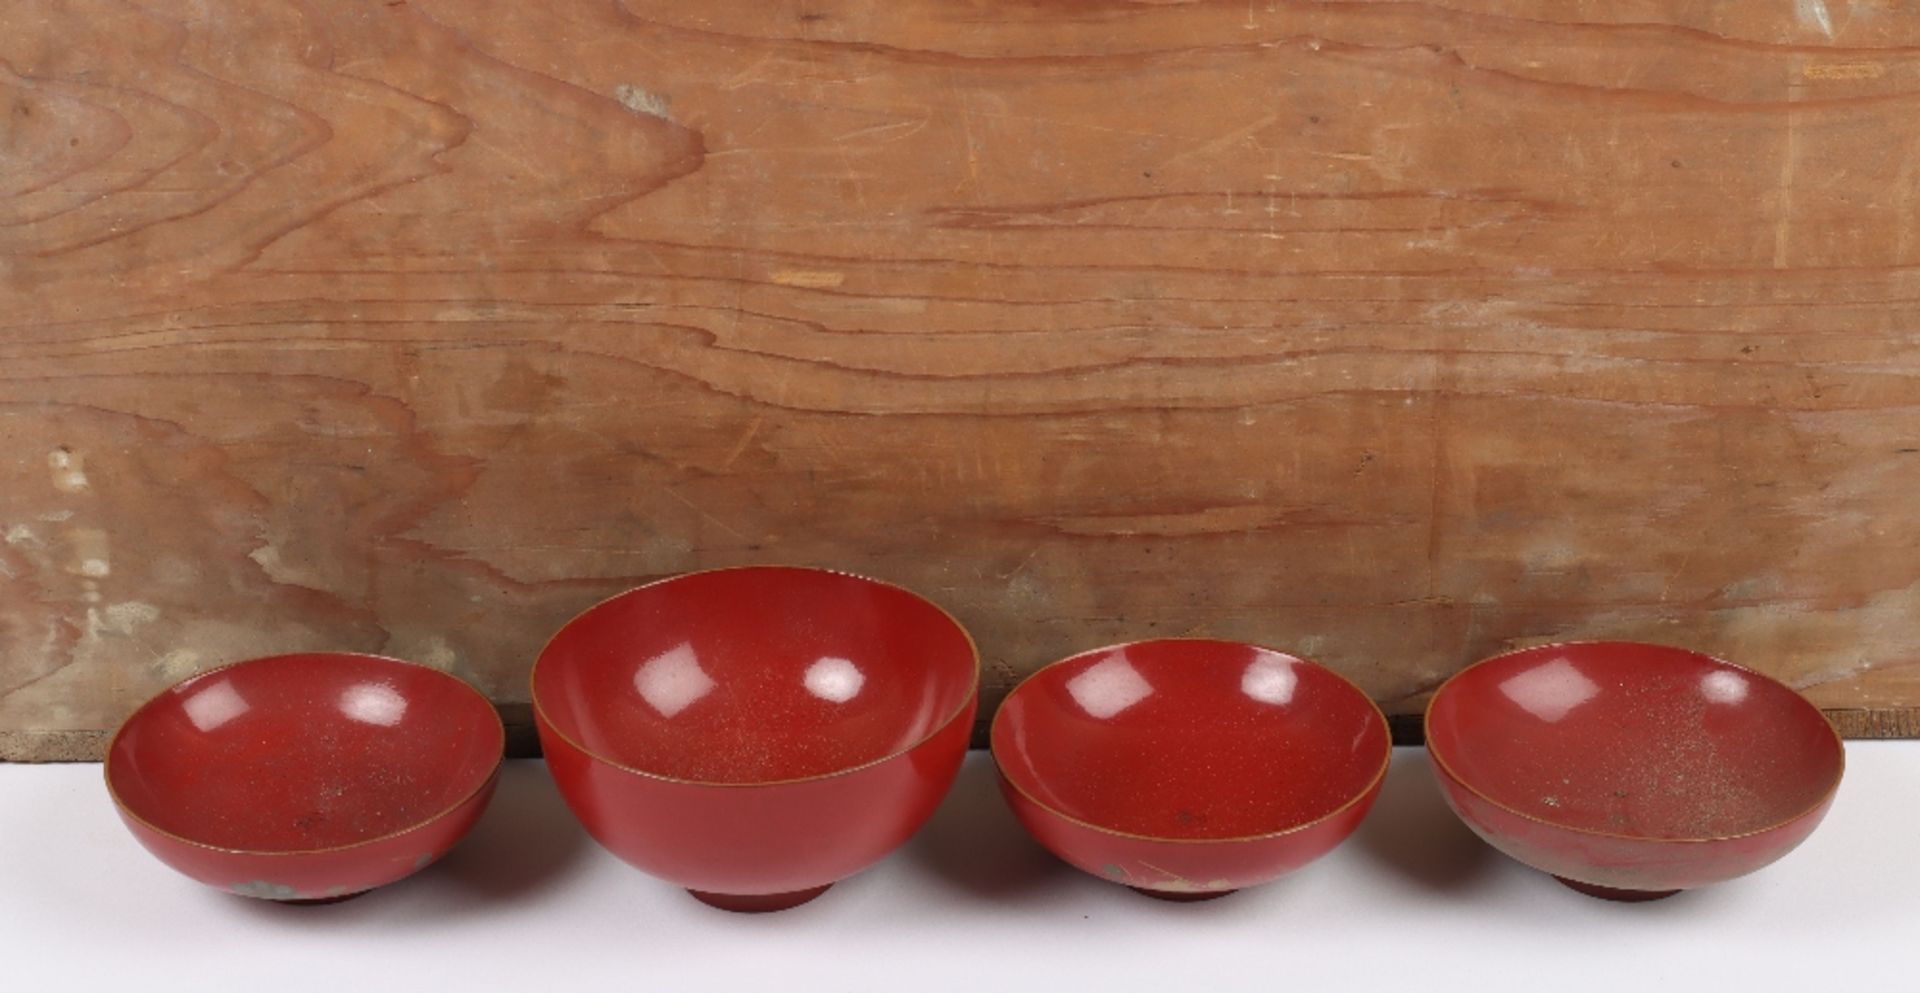 Ten stacks of Japanese red lacquer rice bowl sets - Image 2 of 3